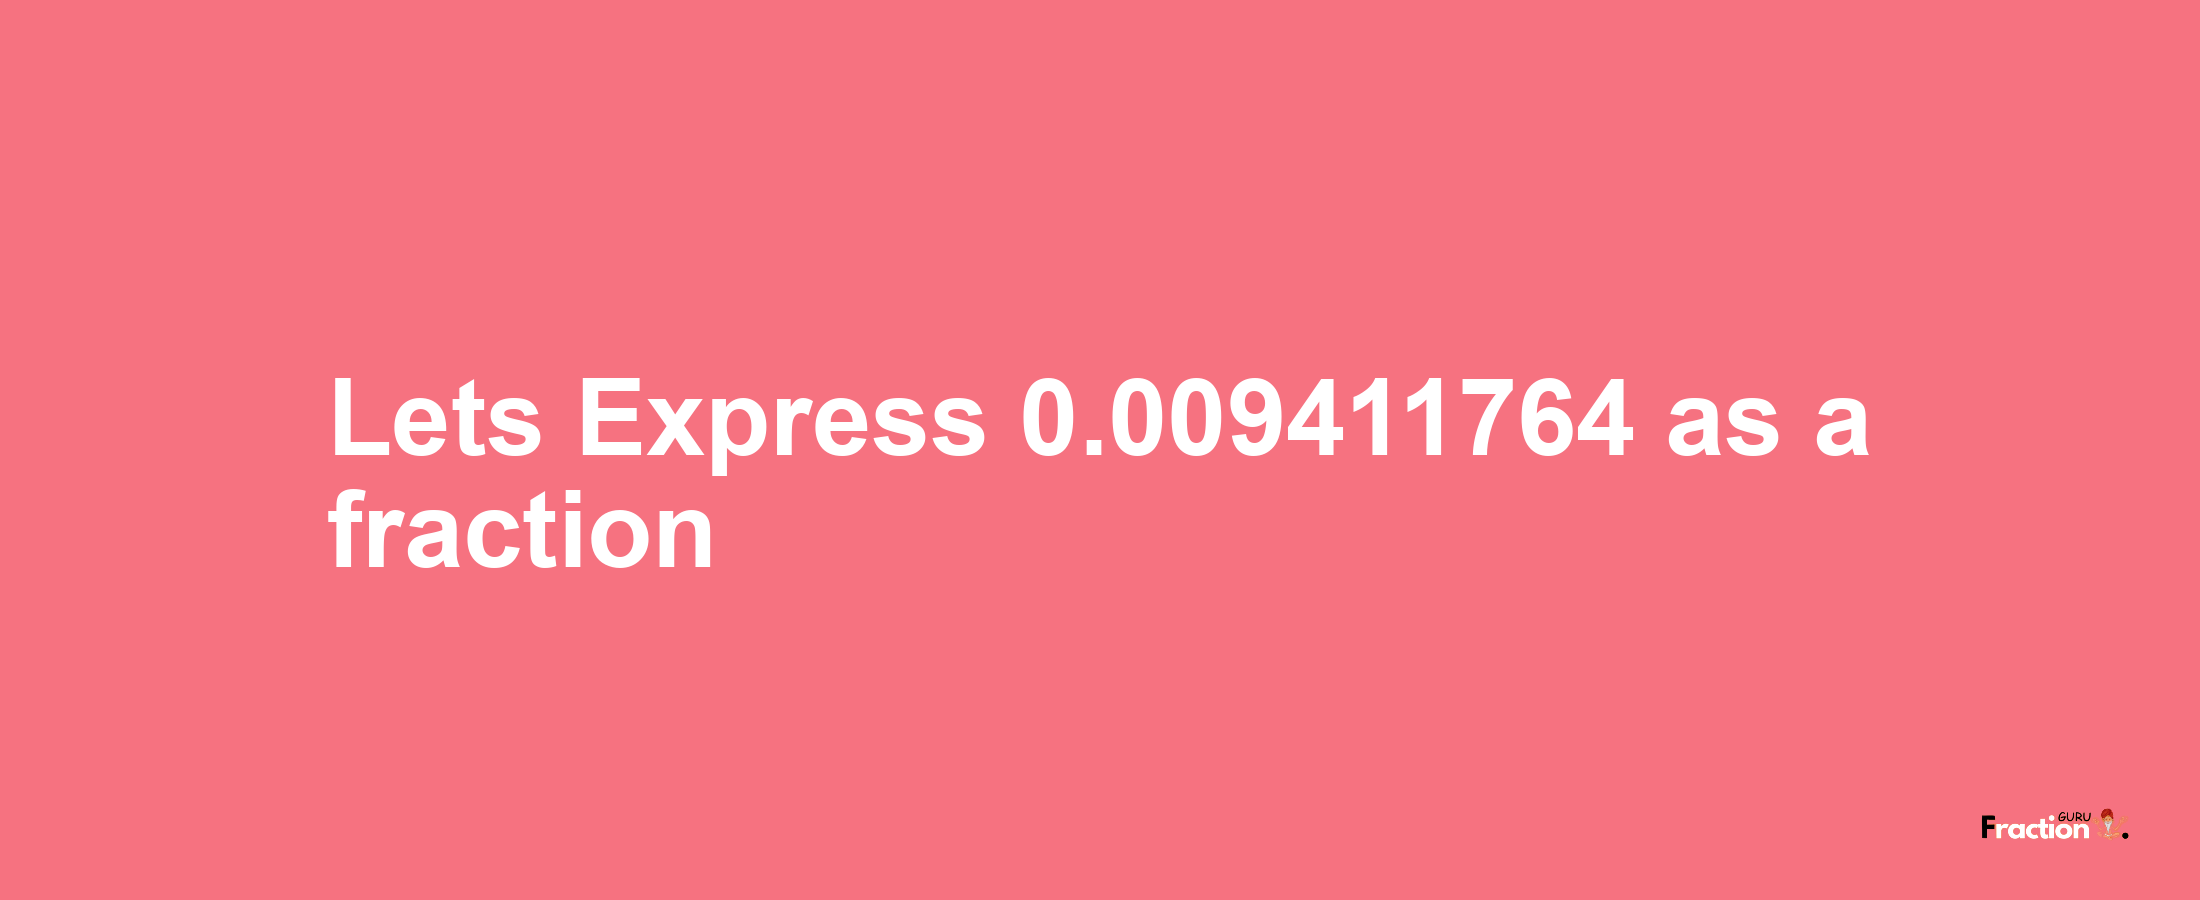 Lets Express 0.009411764 as afraction